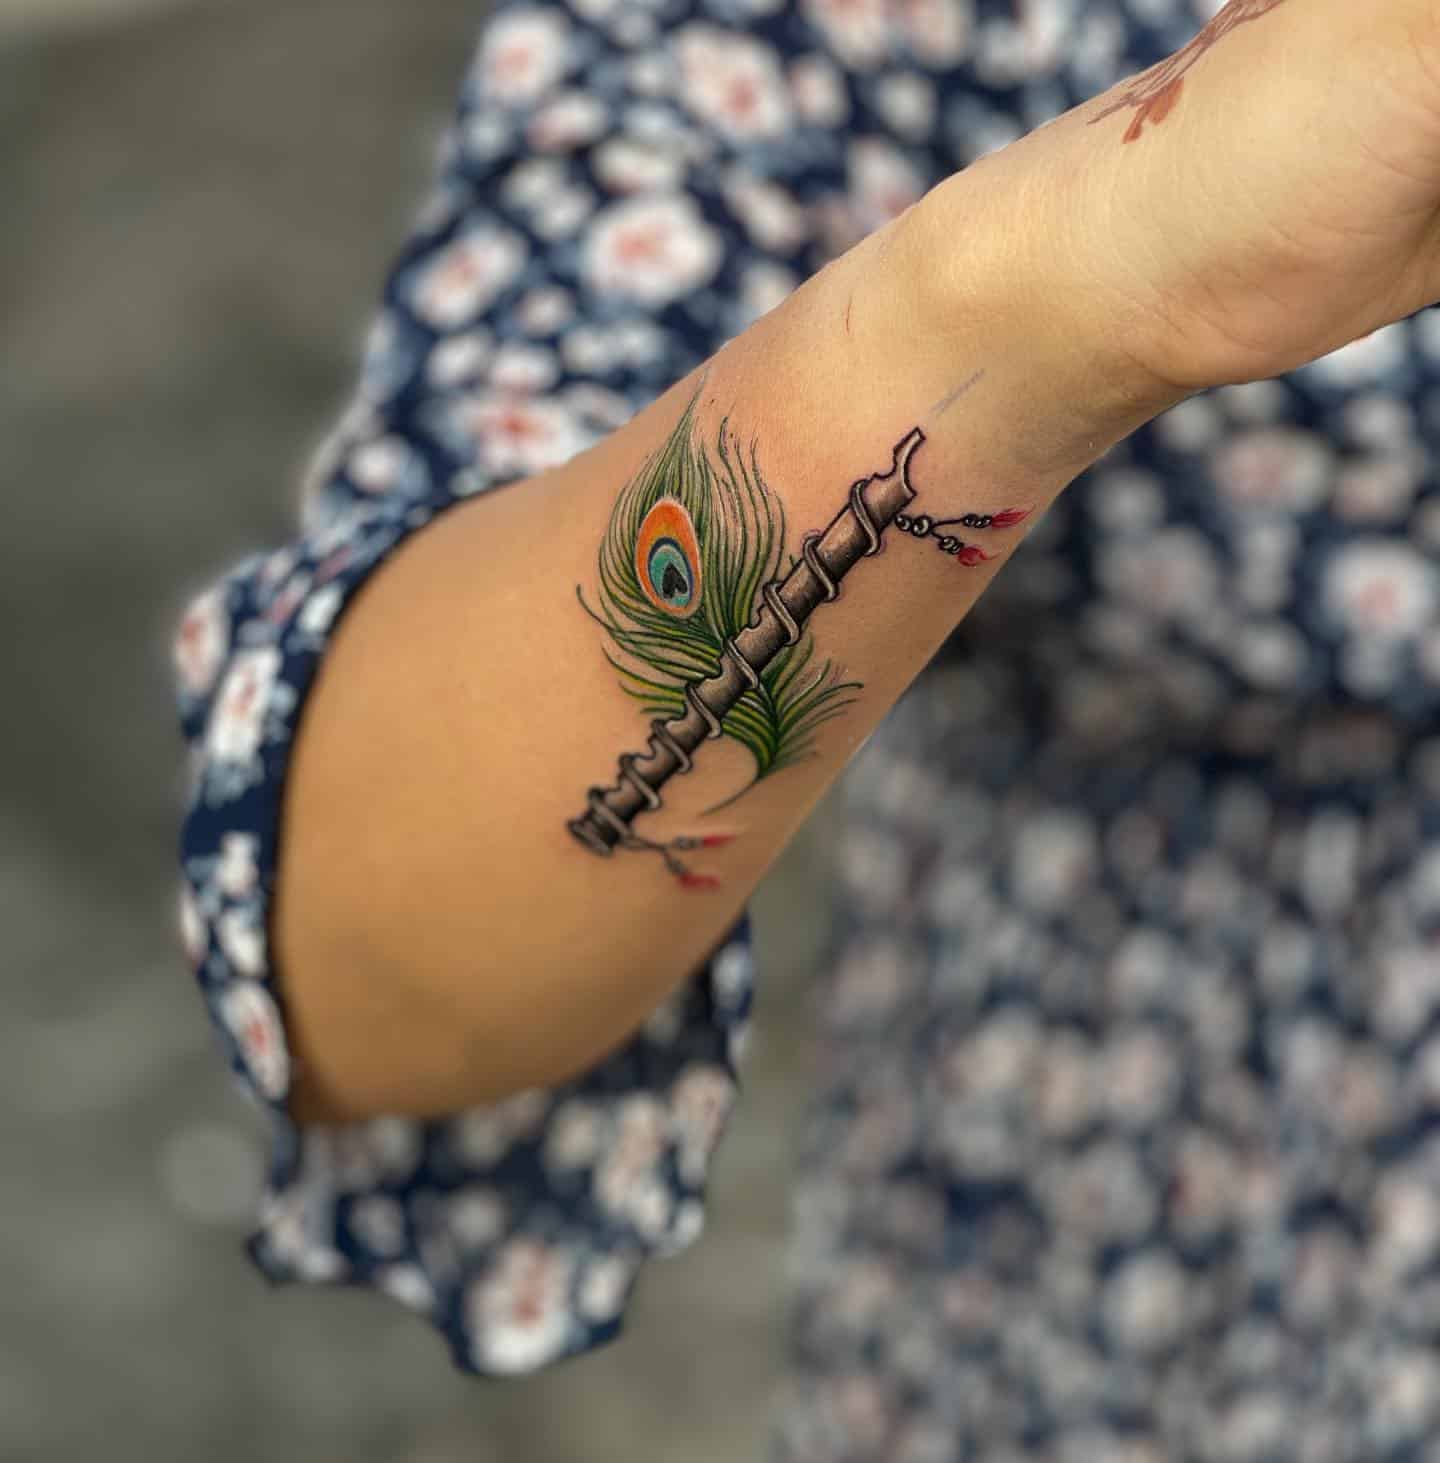 Naksh Tattoos - A feather tattoo is filled with meaning and often  represents the ideas of freedom, courage, bravery, and travel. Native  American and tribal cultures around the world have long used